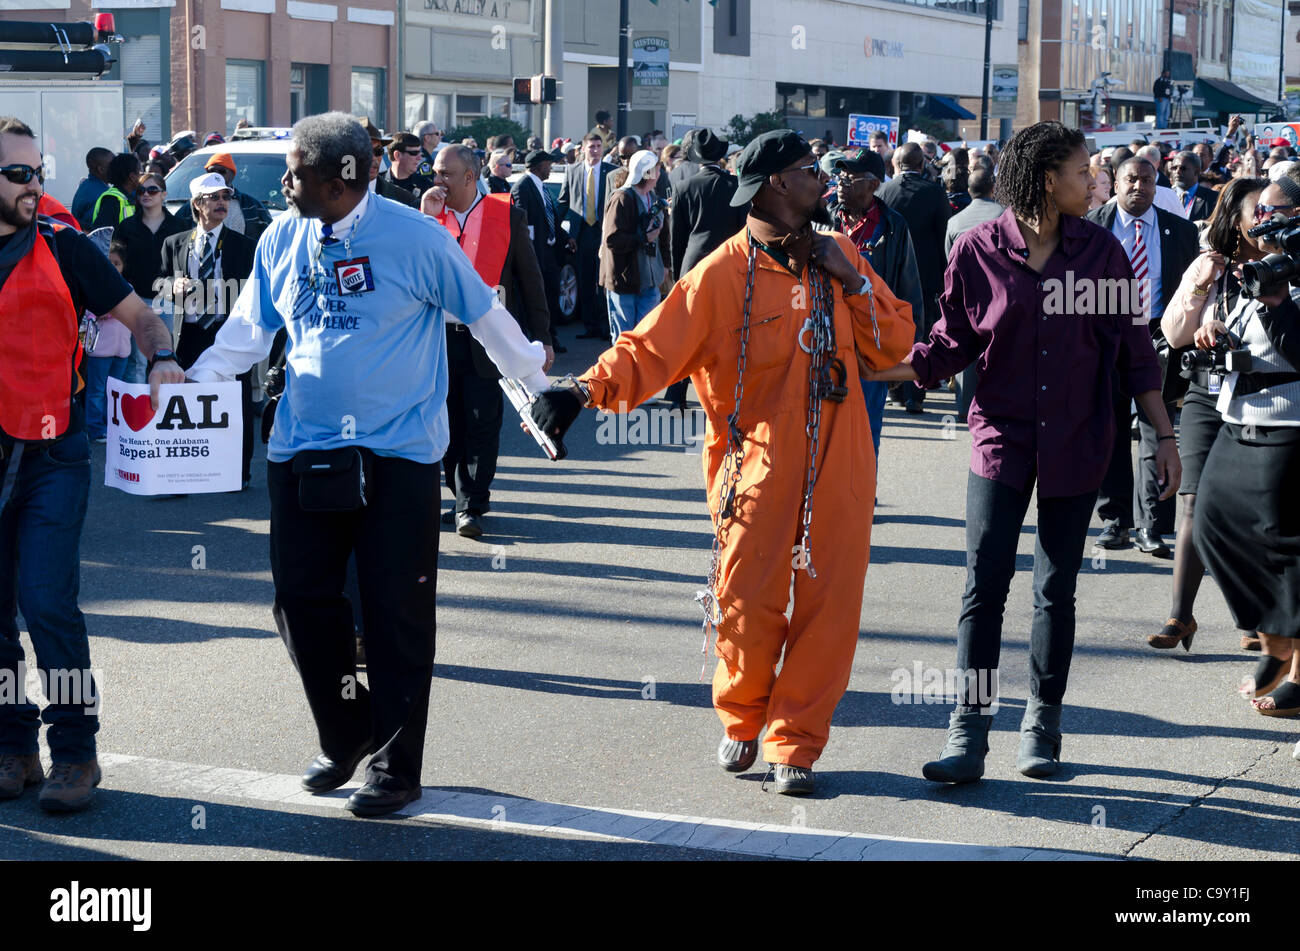 Marchers at the reenactment of the Selma to Montgomery march on Sunday, March 4, 2012.  This march was to commemorate the 1965 voting rights march in Alabama, United States. Stock Photo